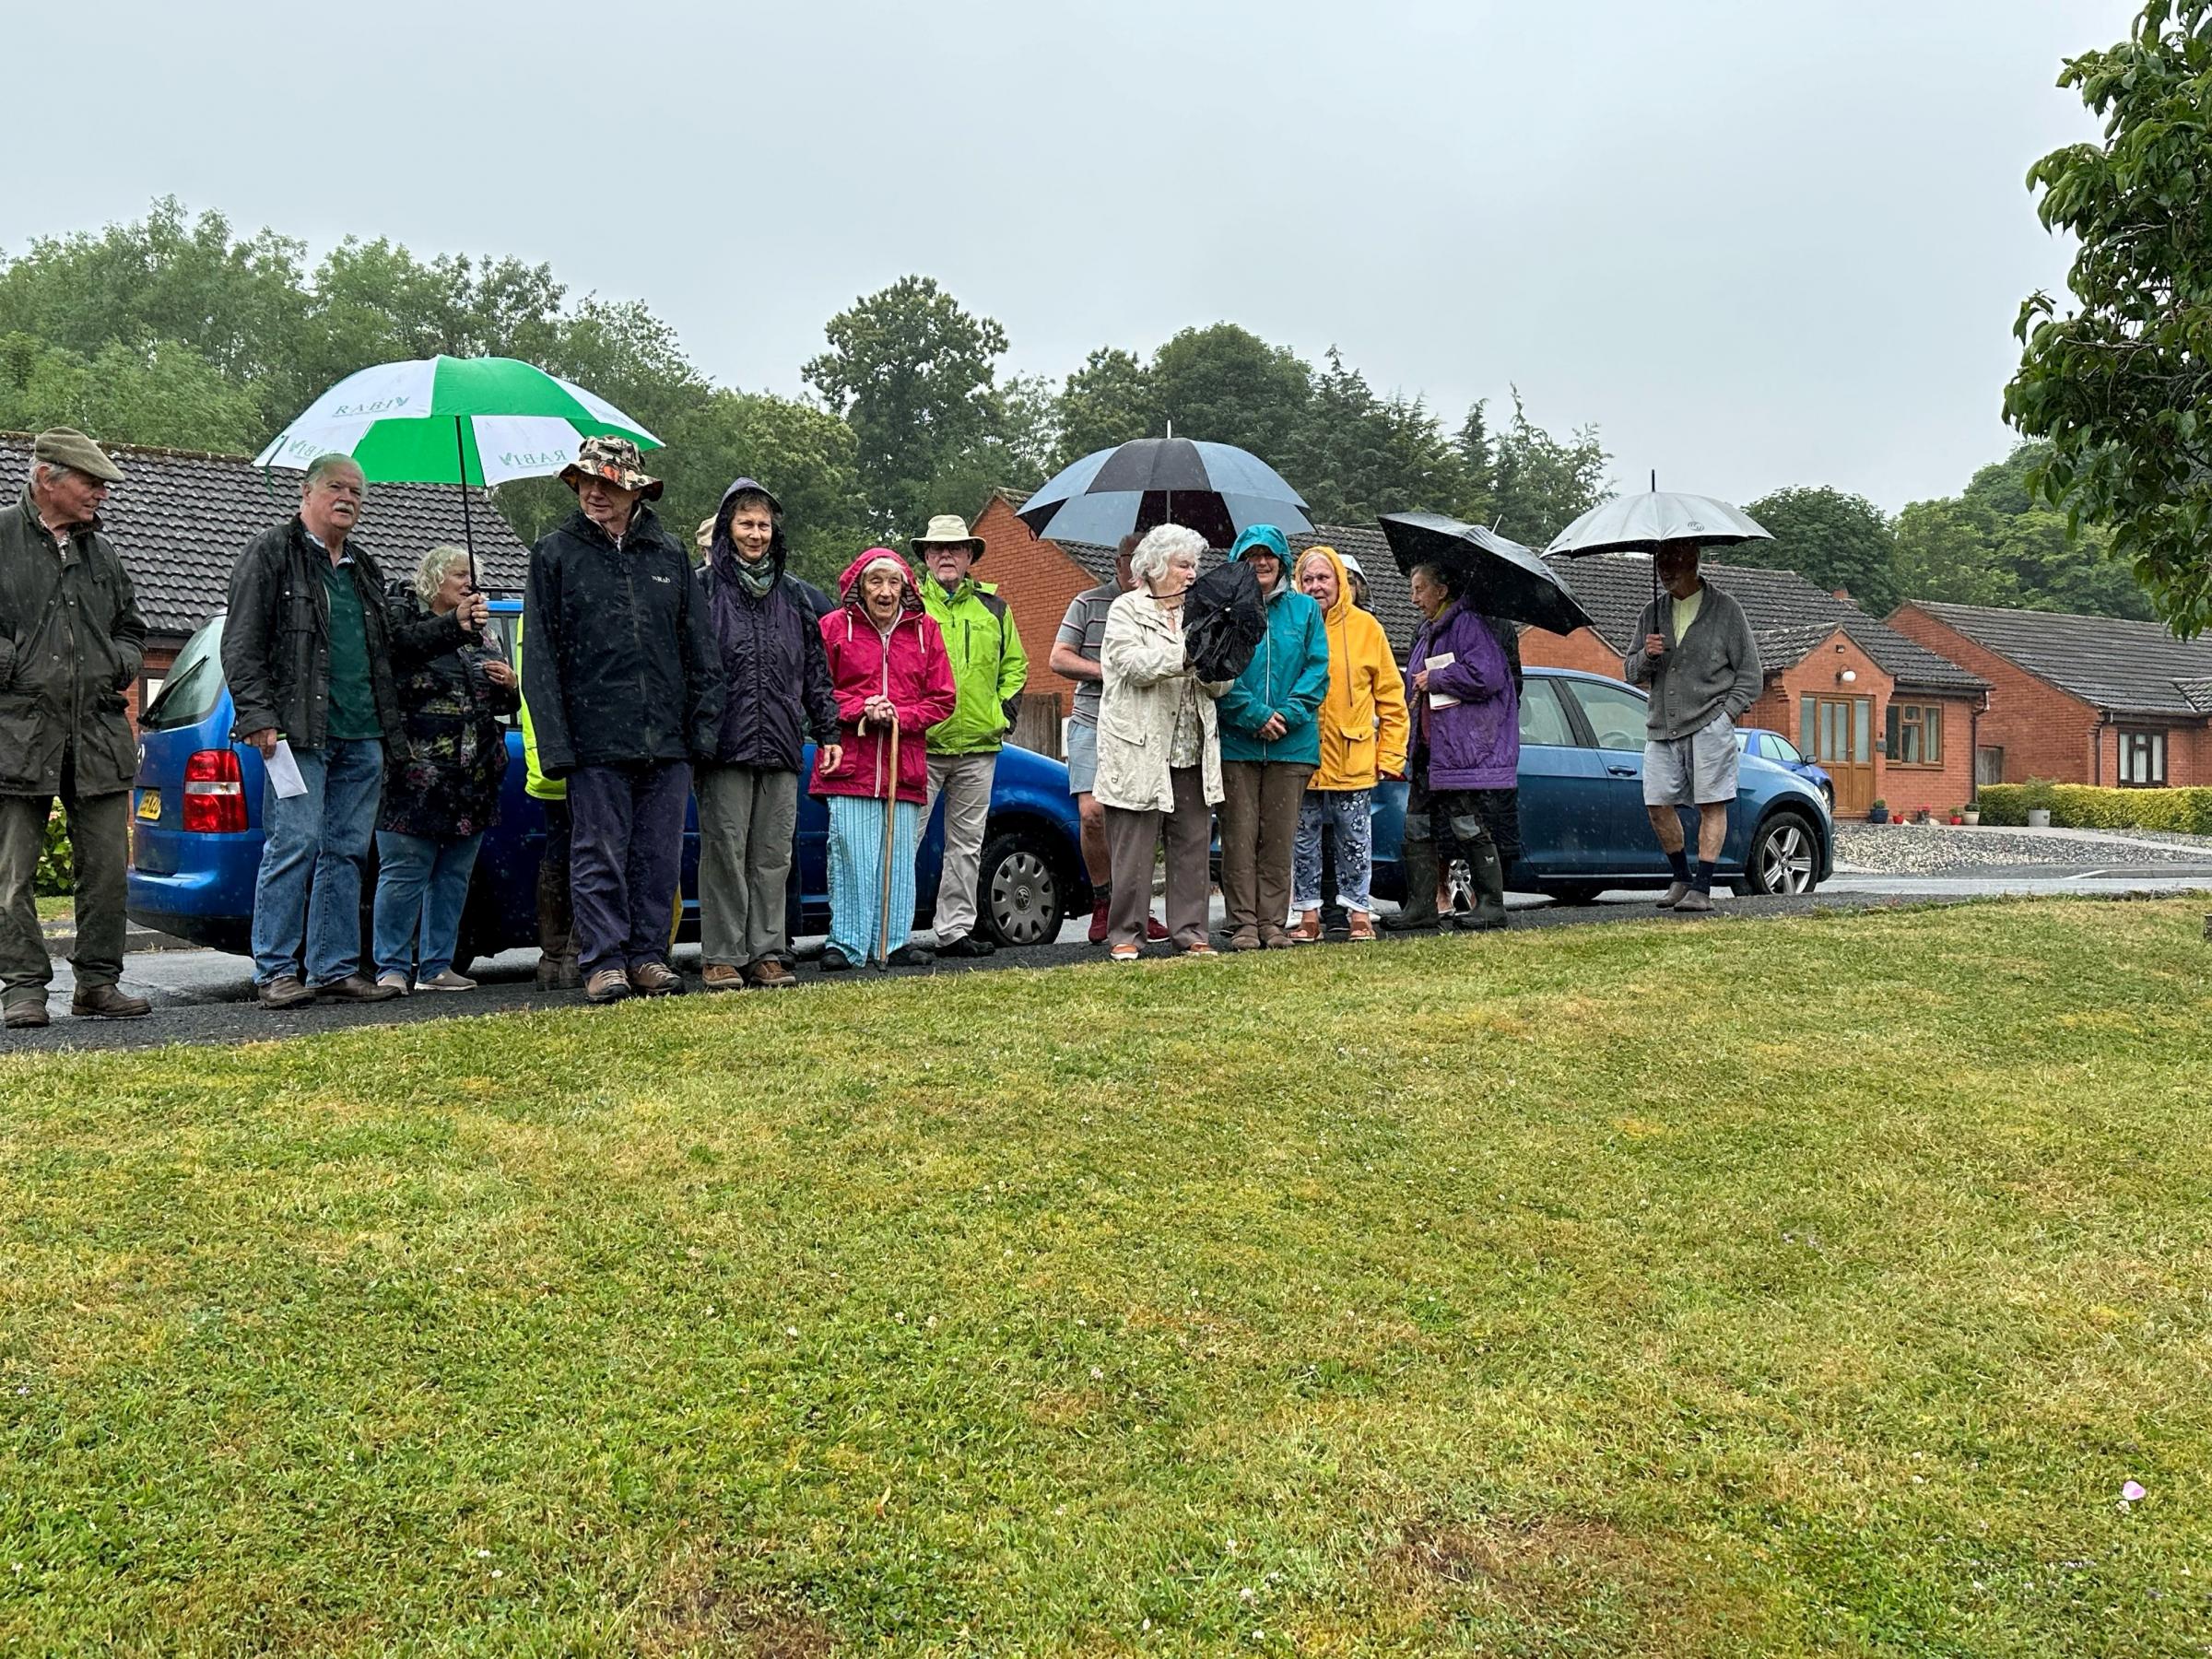 Neighbours turned out despite the rain to wish Barry a happy 103rd birthday